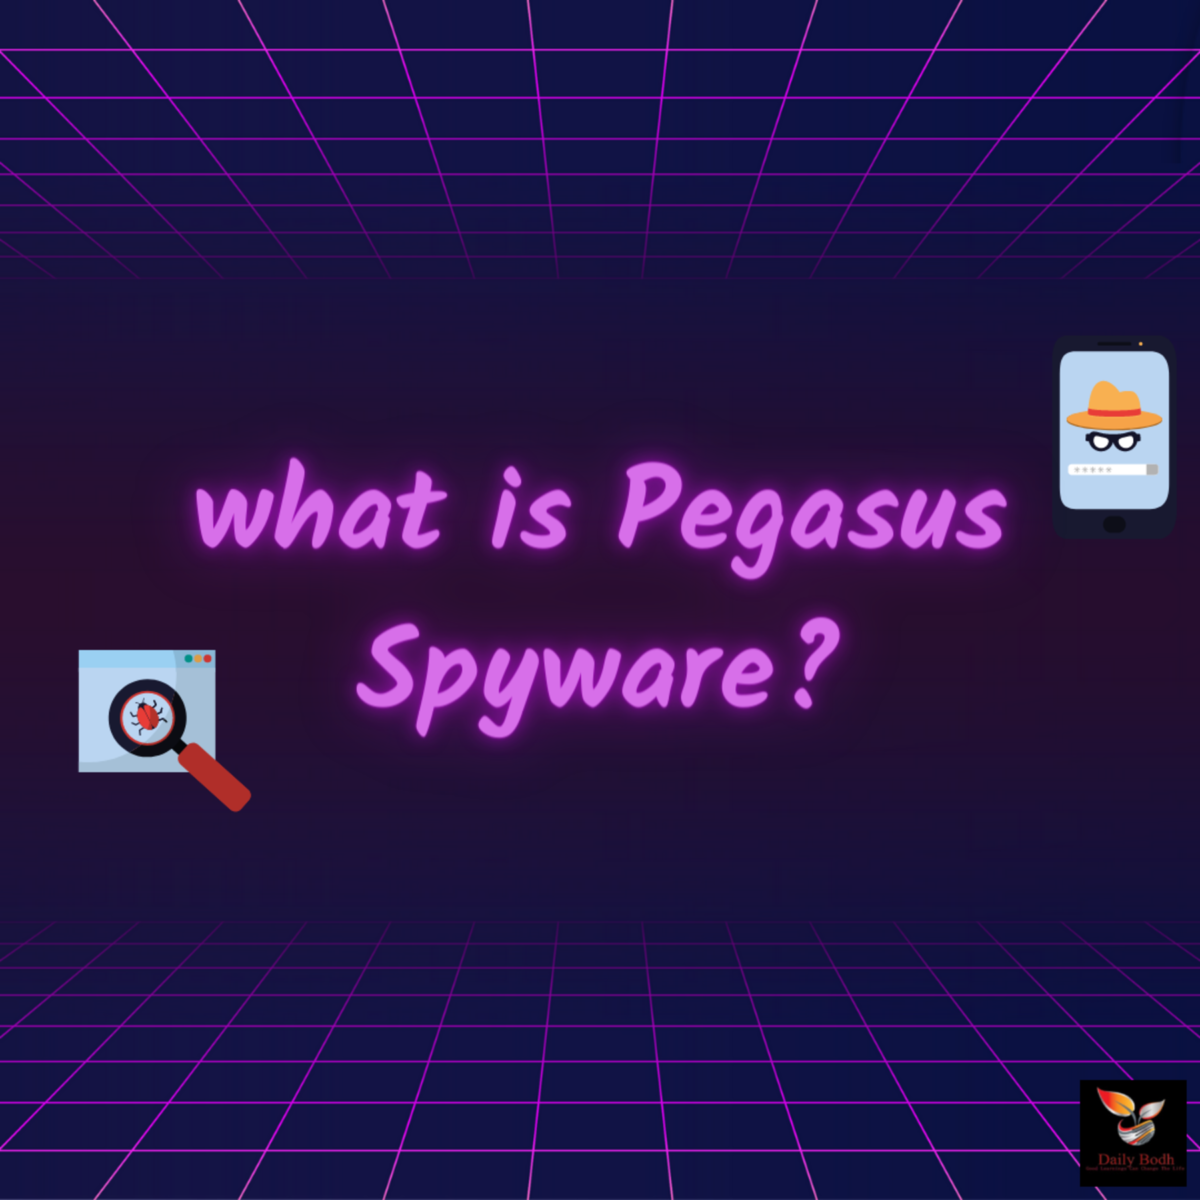 You are currently viewing Pegasus Spyware – Full Information